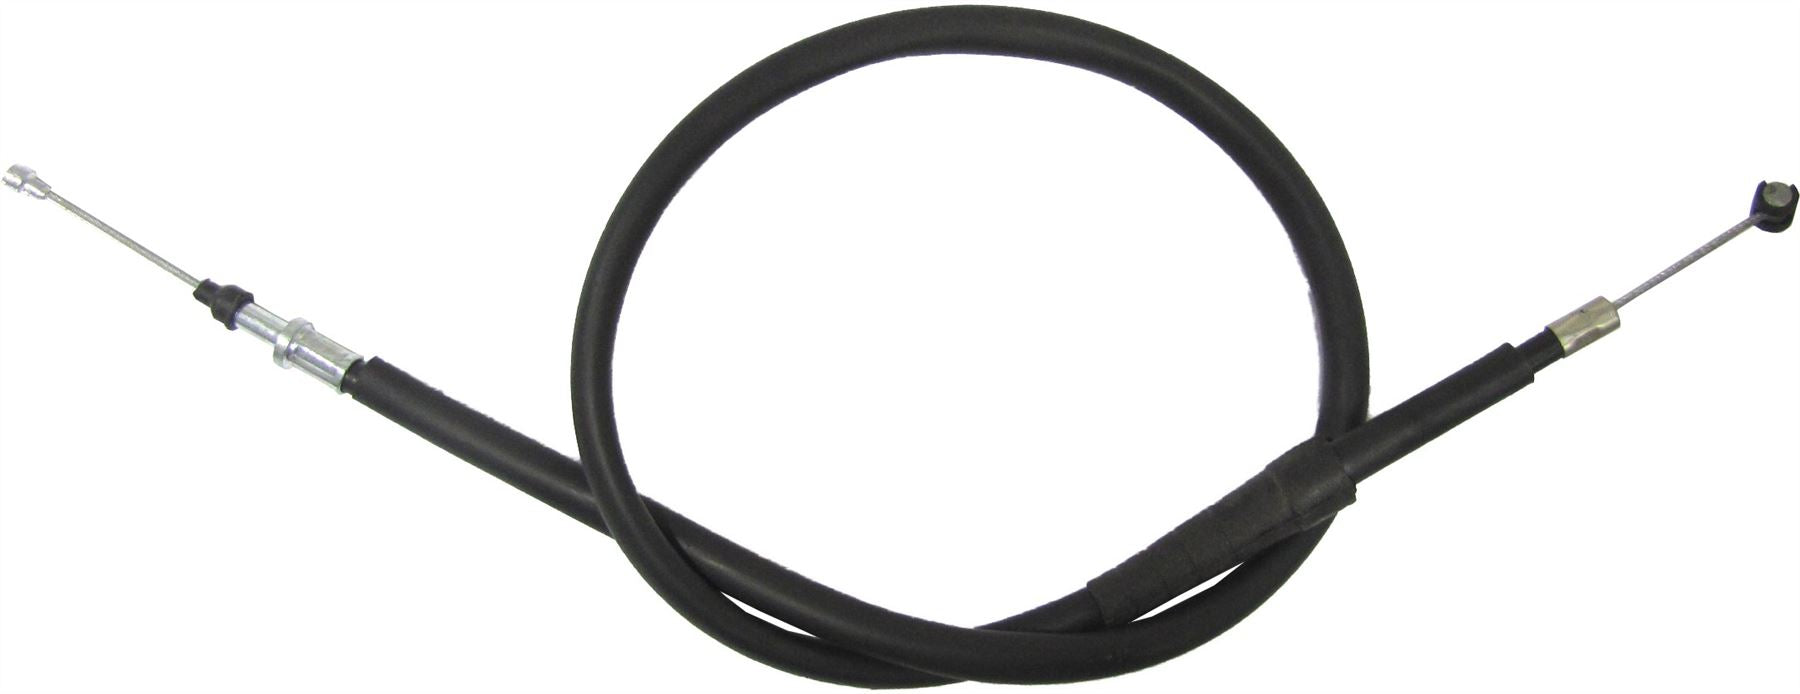 Clutch Cable Fits Yamaha XZ 550 1982-1984